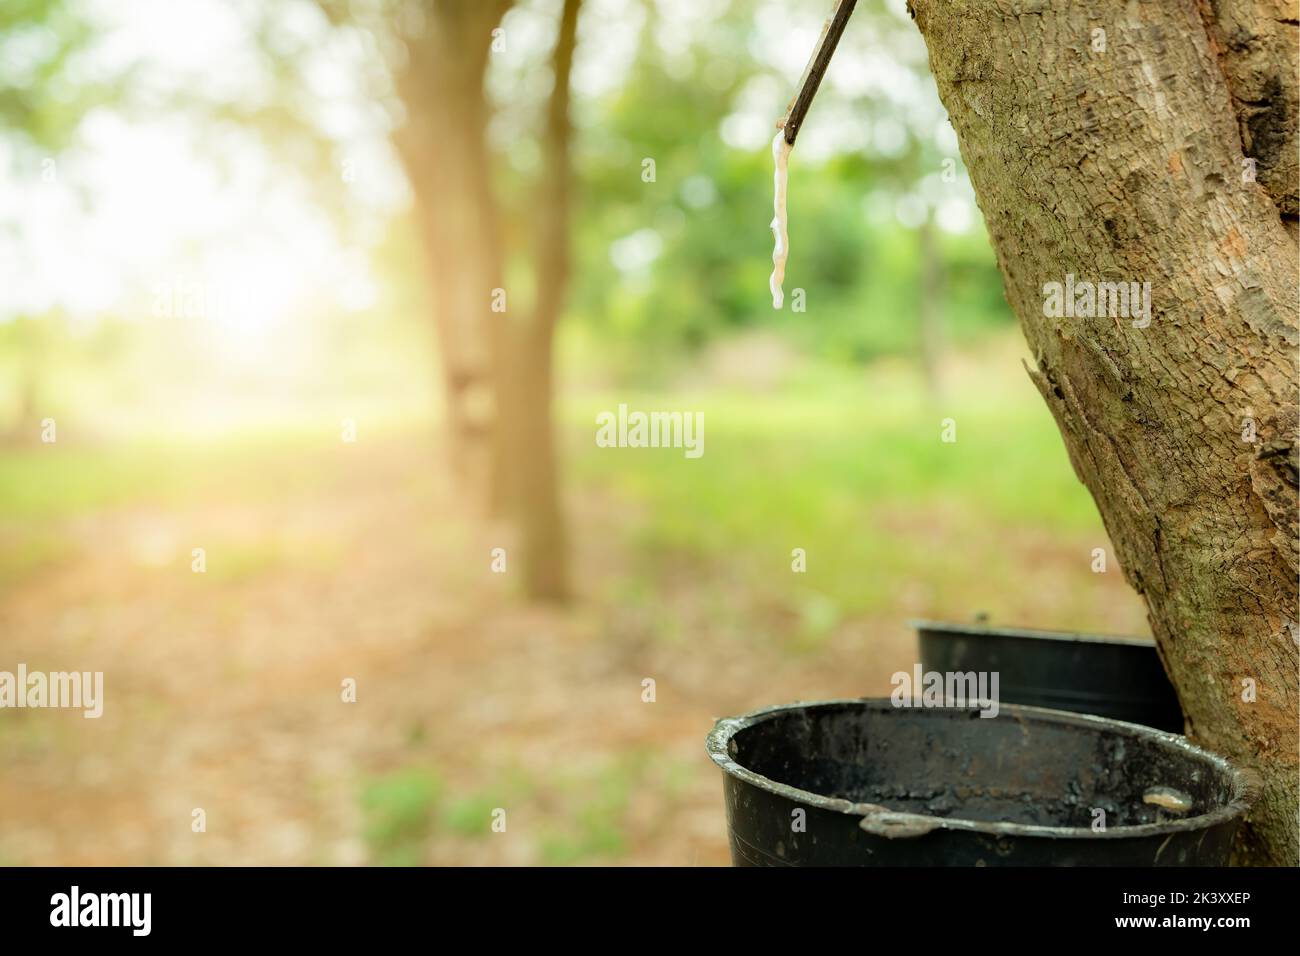 Rubber tapping in rubber tree garden. Natural latex extracted from para rubber plant. Rubber tree plantation. The milky liquid or latex oozes from wou Stock Photo